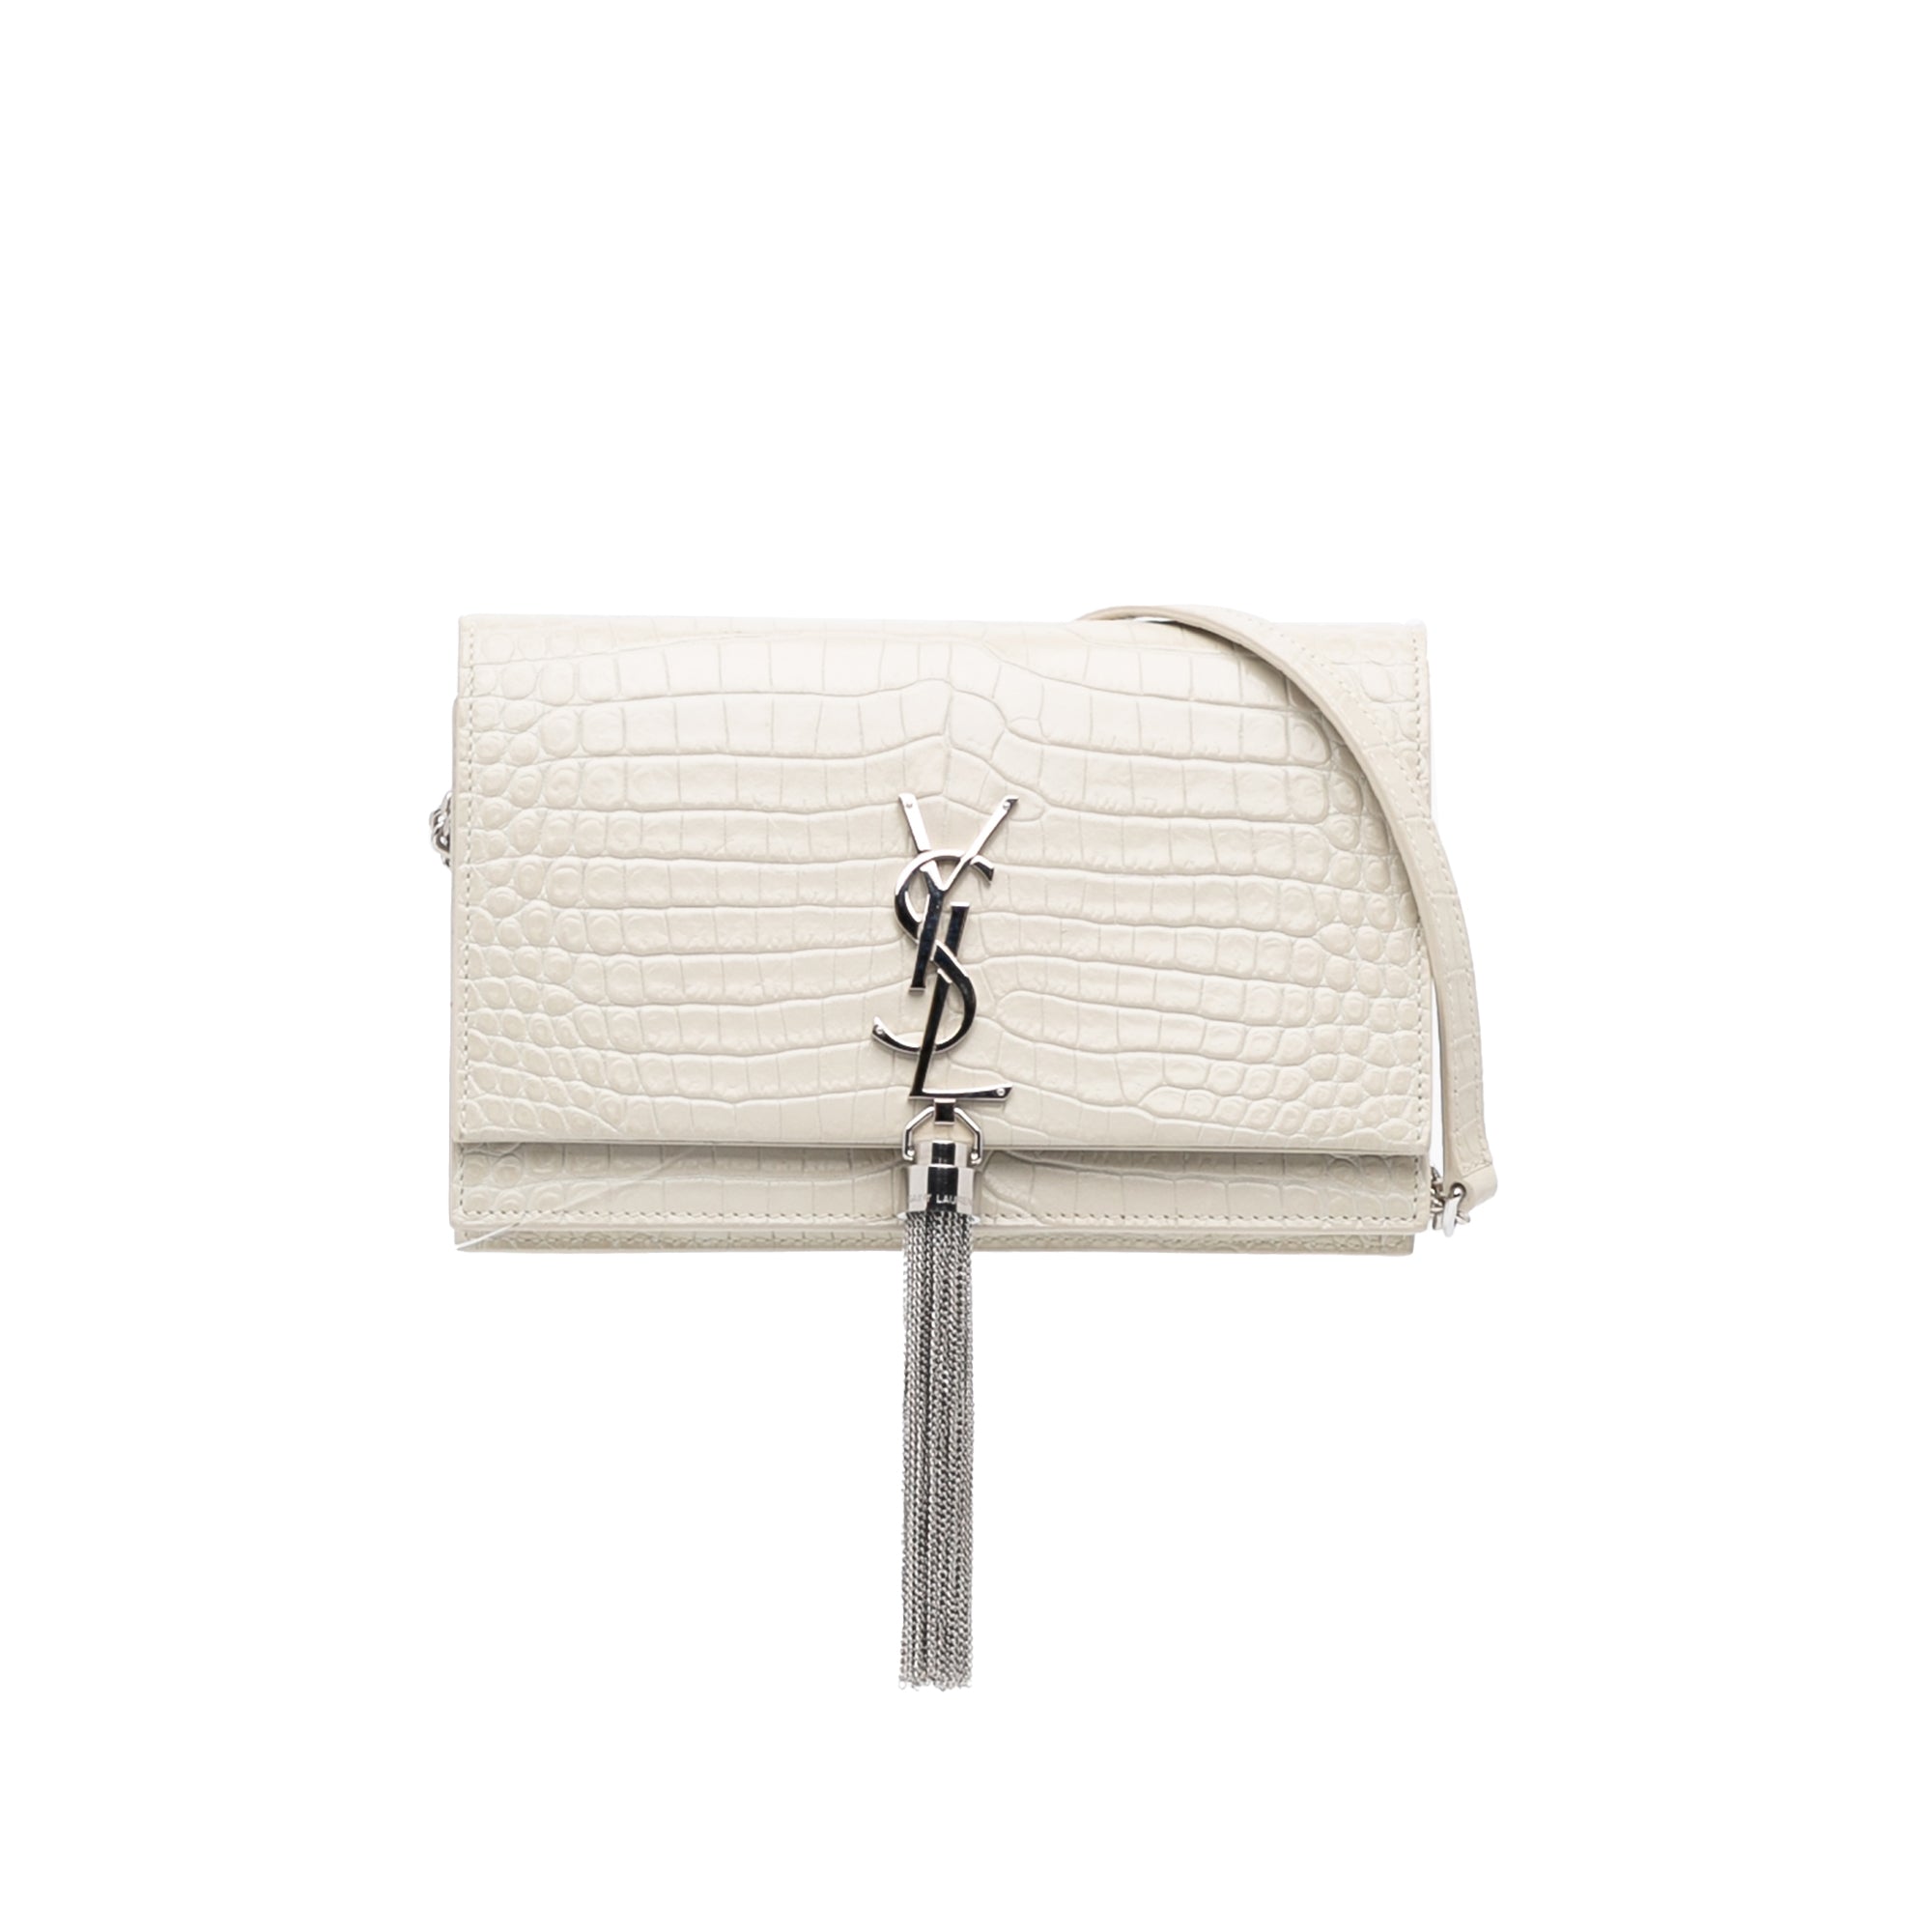 Kate monogramme leather clutch bag Saint Laurent Beige in Leather